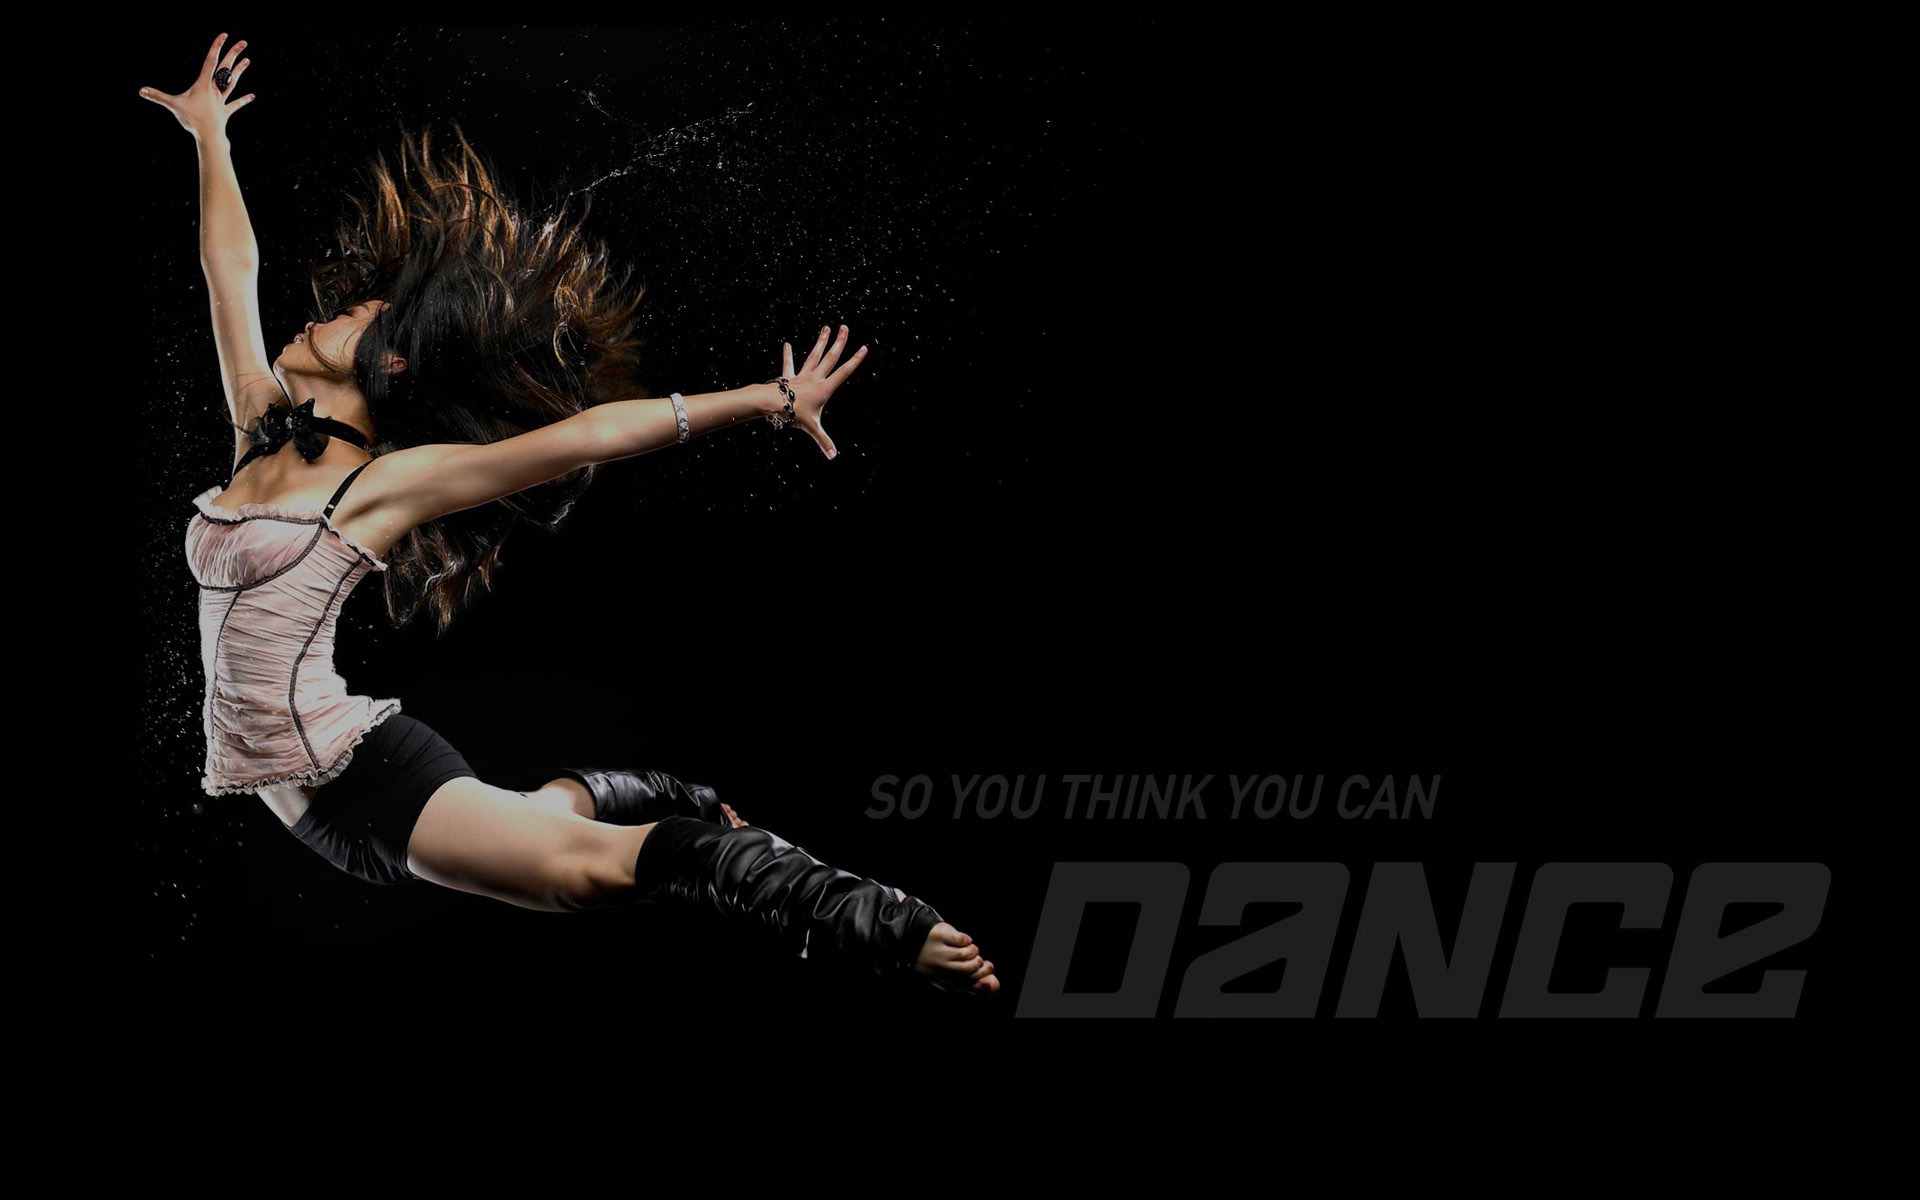 So You Think You Can Dance 舞林争霸 壁纸(一)1 - 1920x1200